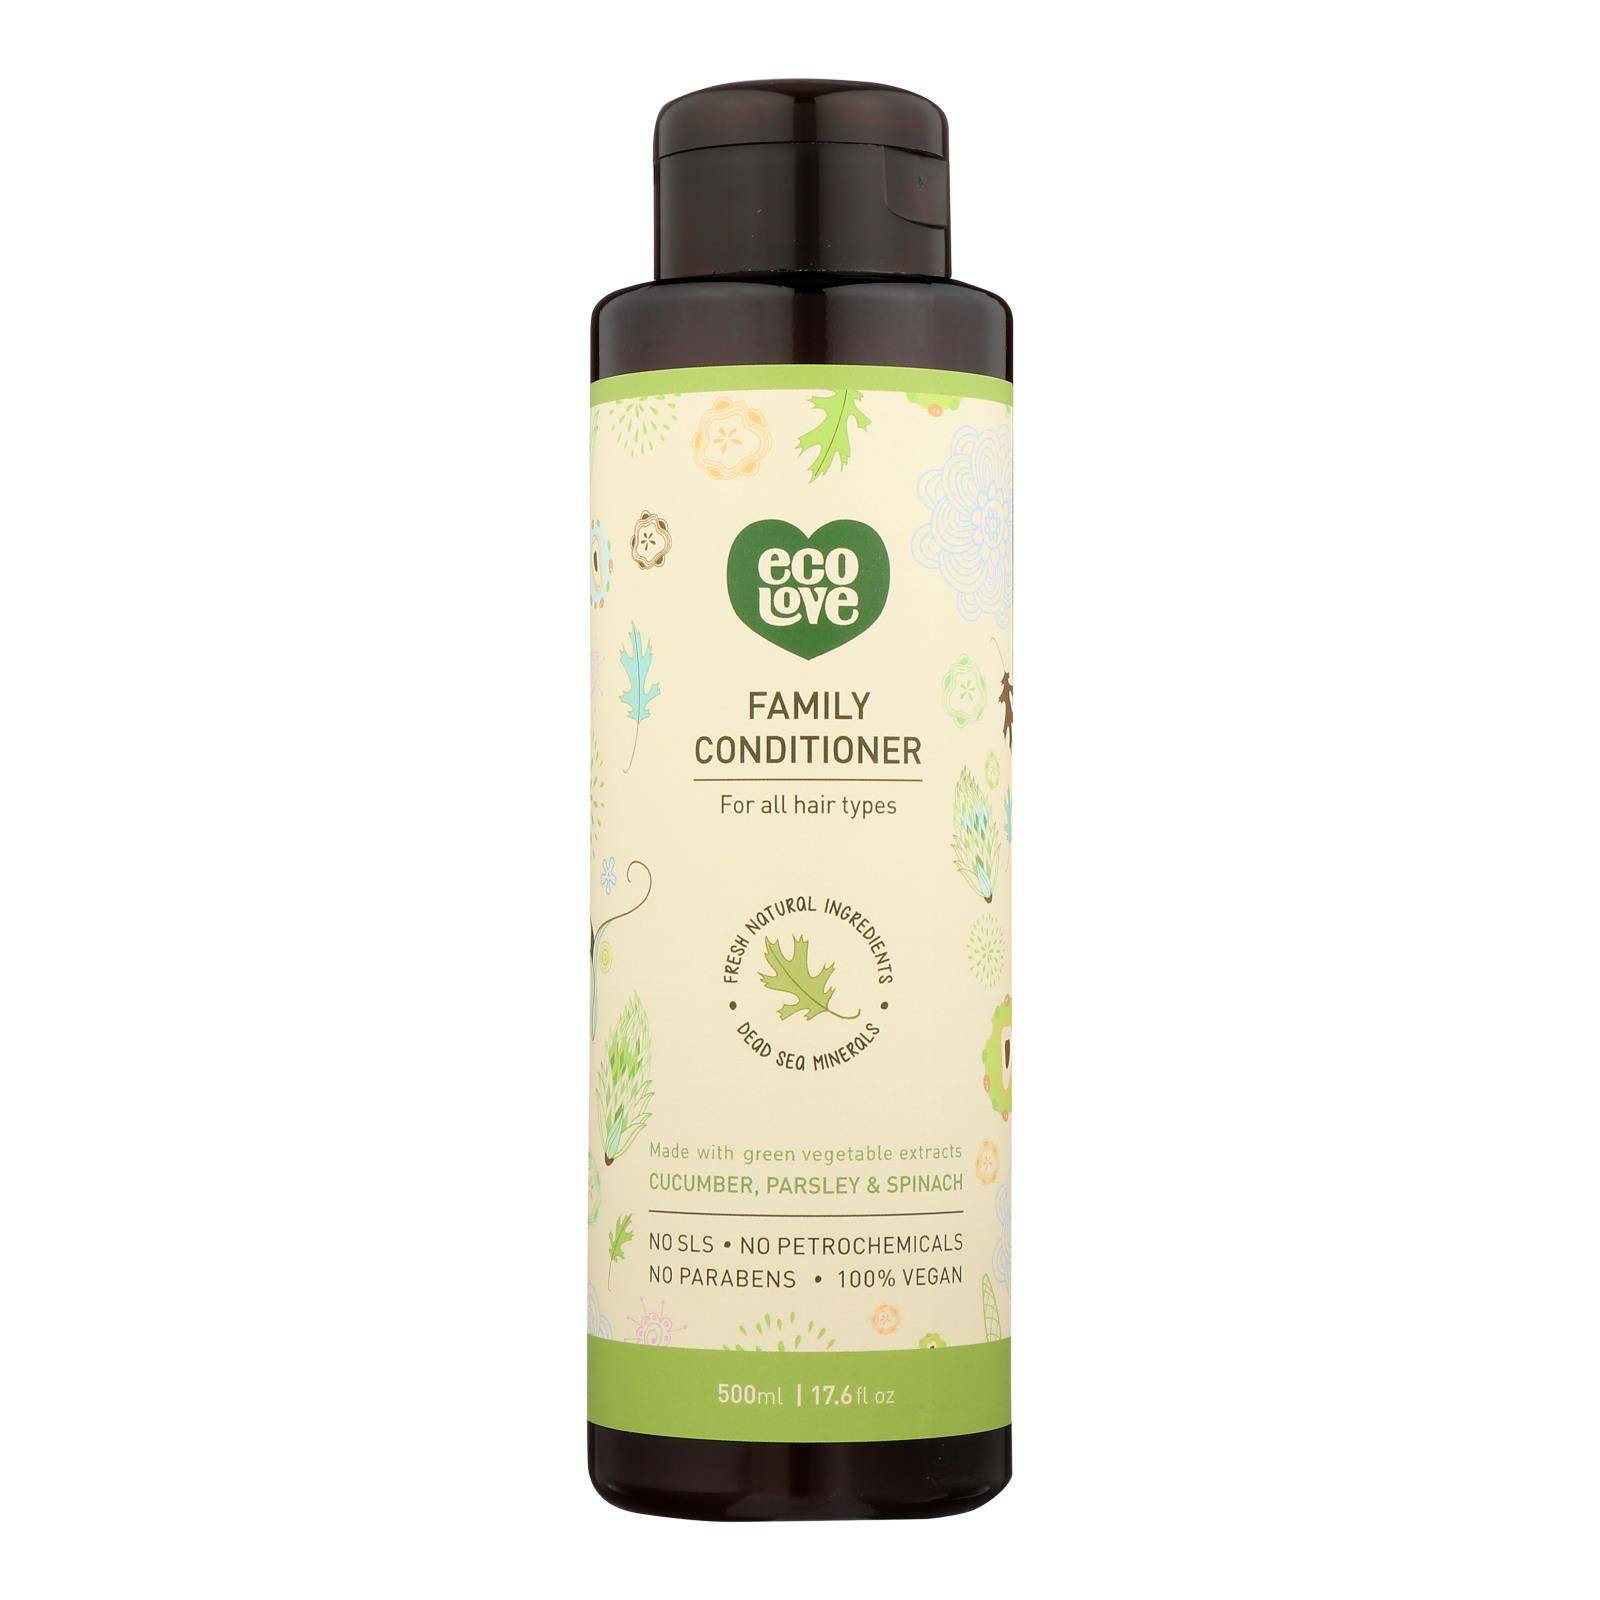 Buy Ecolove Conditioner - Green Vegetables Family Conditioner For All Hair Types - Case Of 1 - 17.6 Fl Oz.  at OnlyNaturals.us